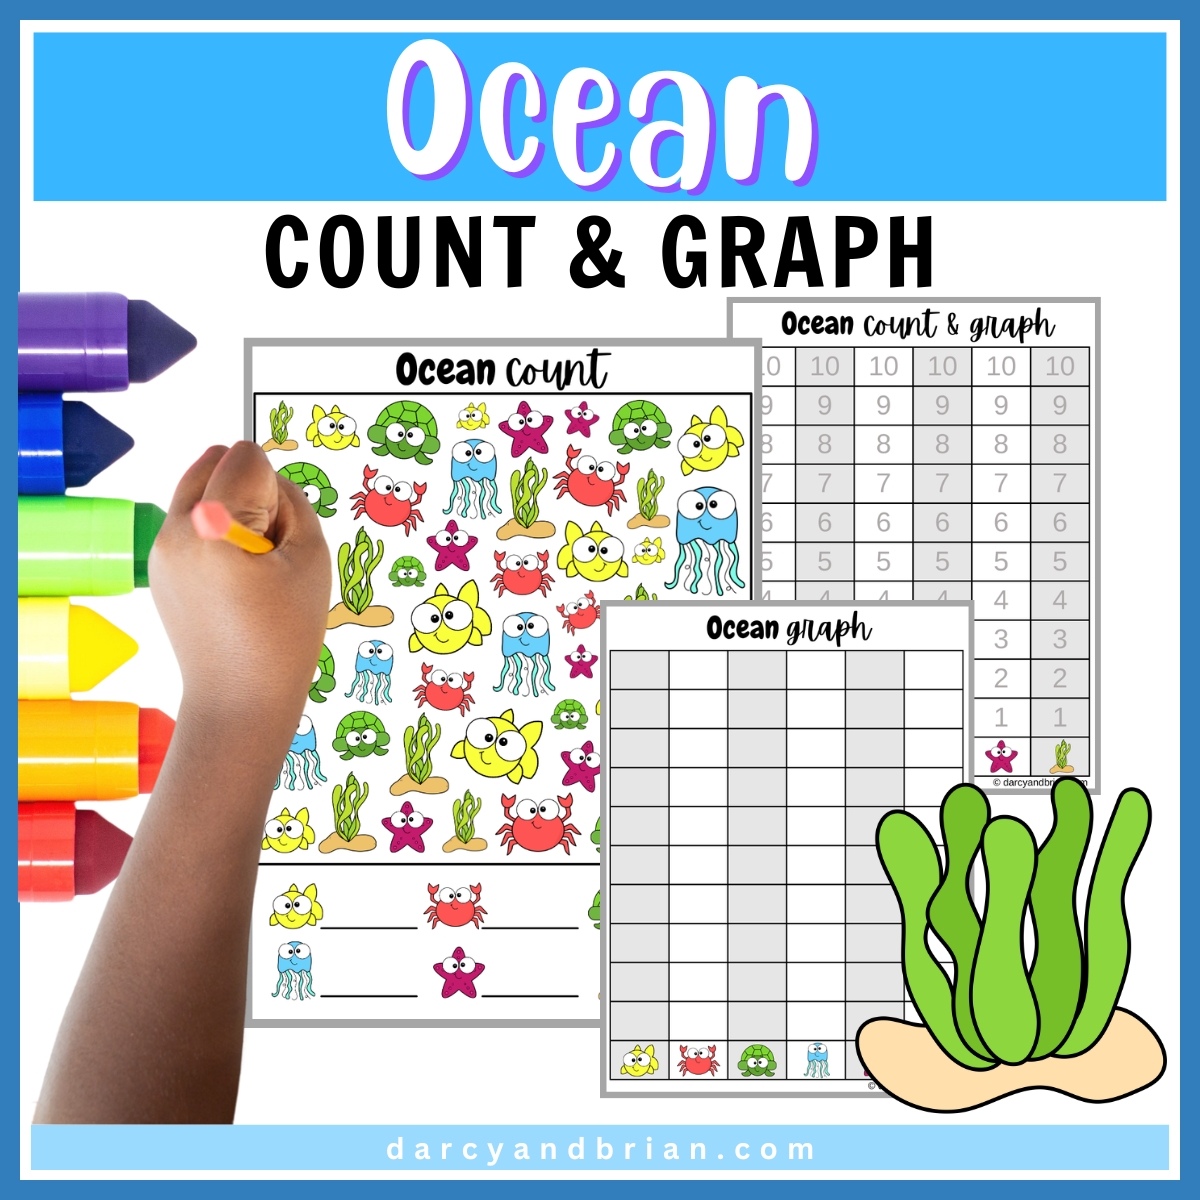 Ocean Count and Graph